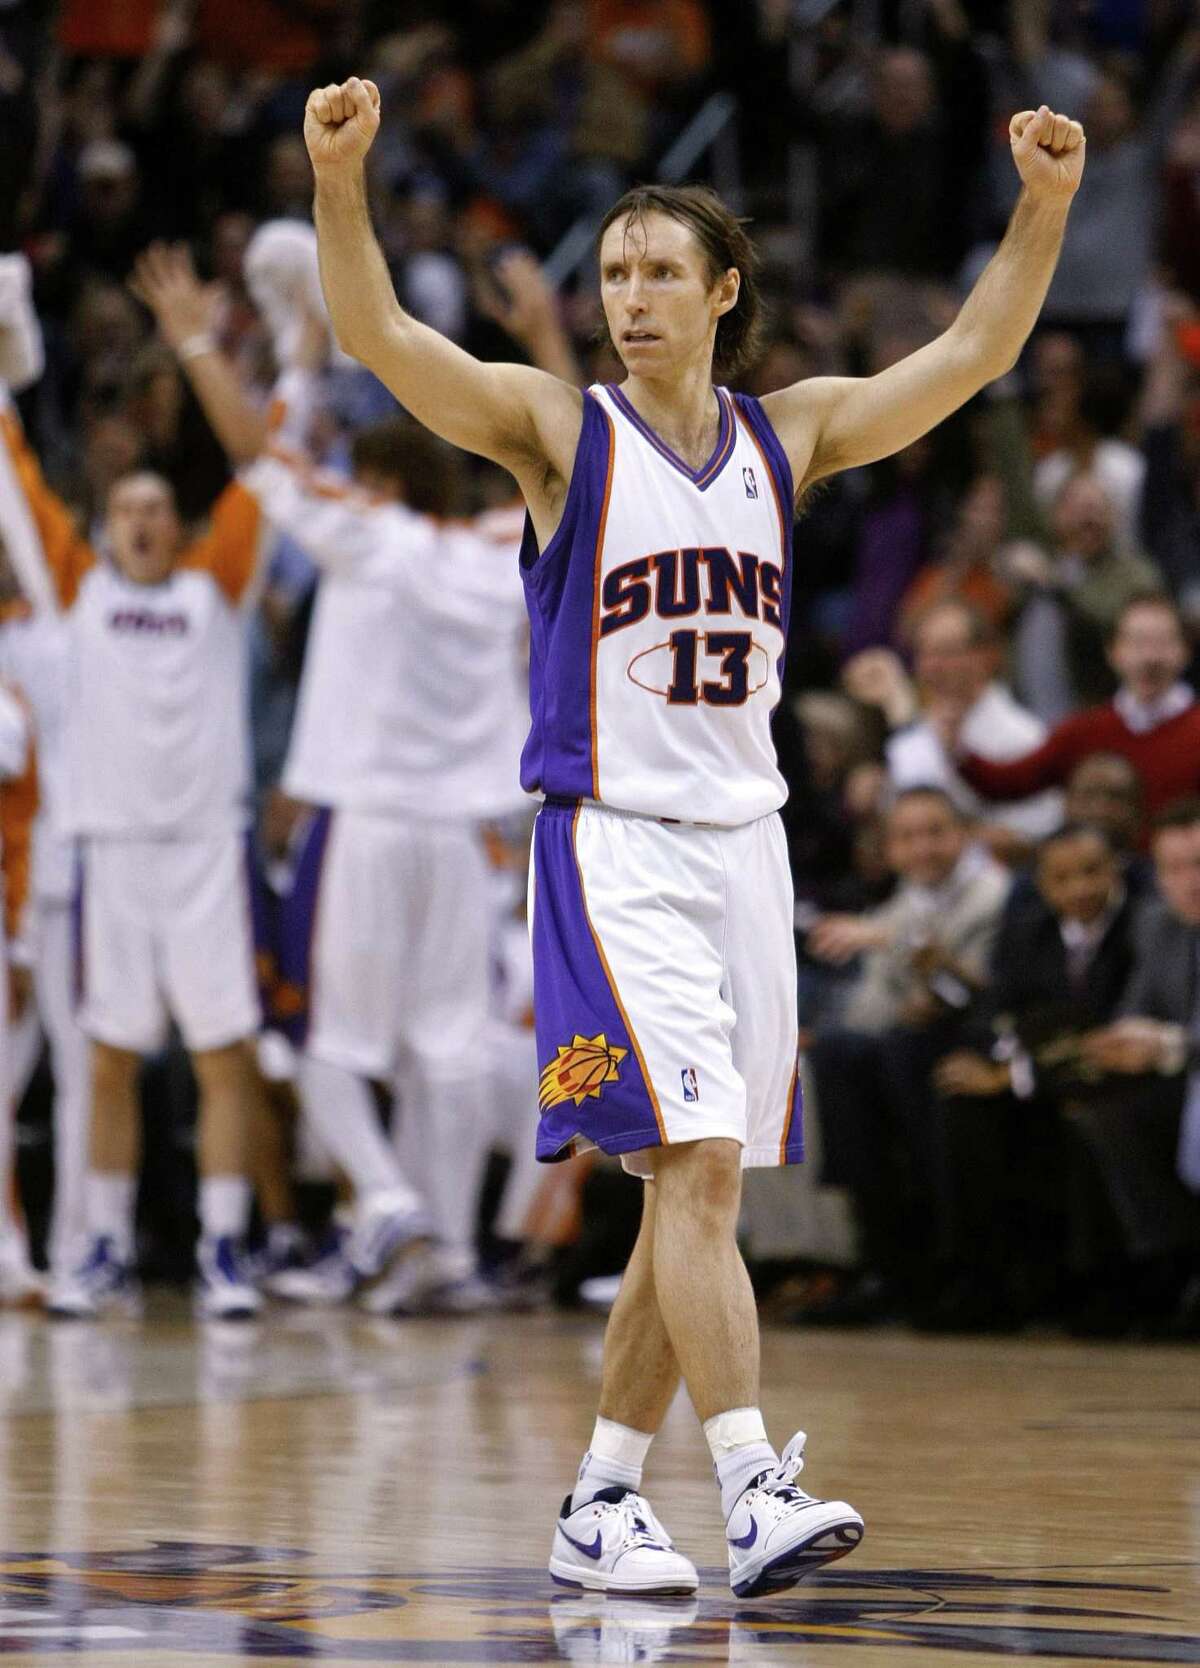 Phoenix Suns' Steve Nash cheers during the second half of the Suns' 118-103 win over the Los Angeles Lakers in an NBA basketball game Monday, Dec. 28, 2009, in Phoenix. (AP Photo/Matt York)